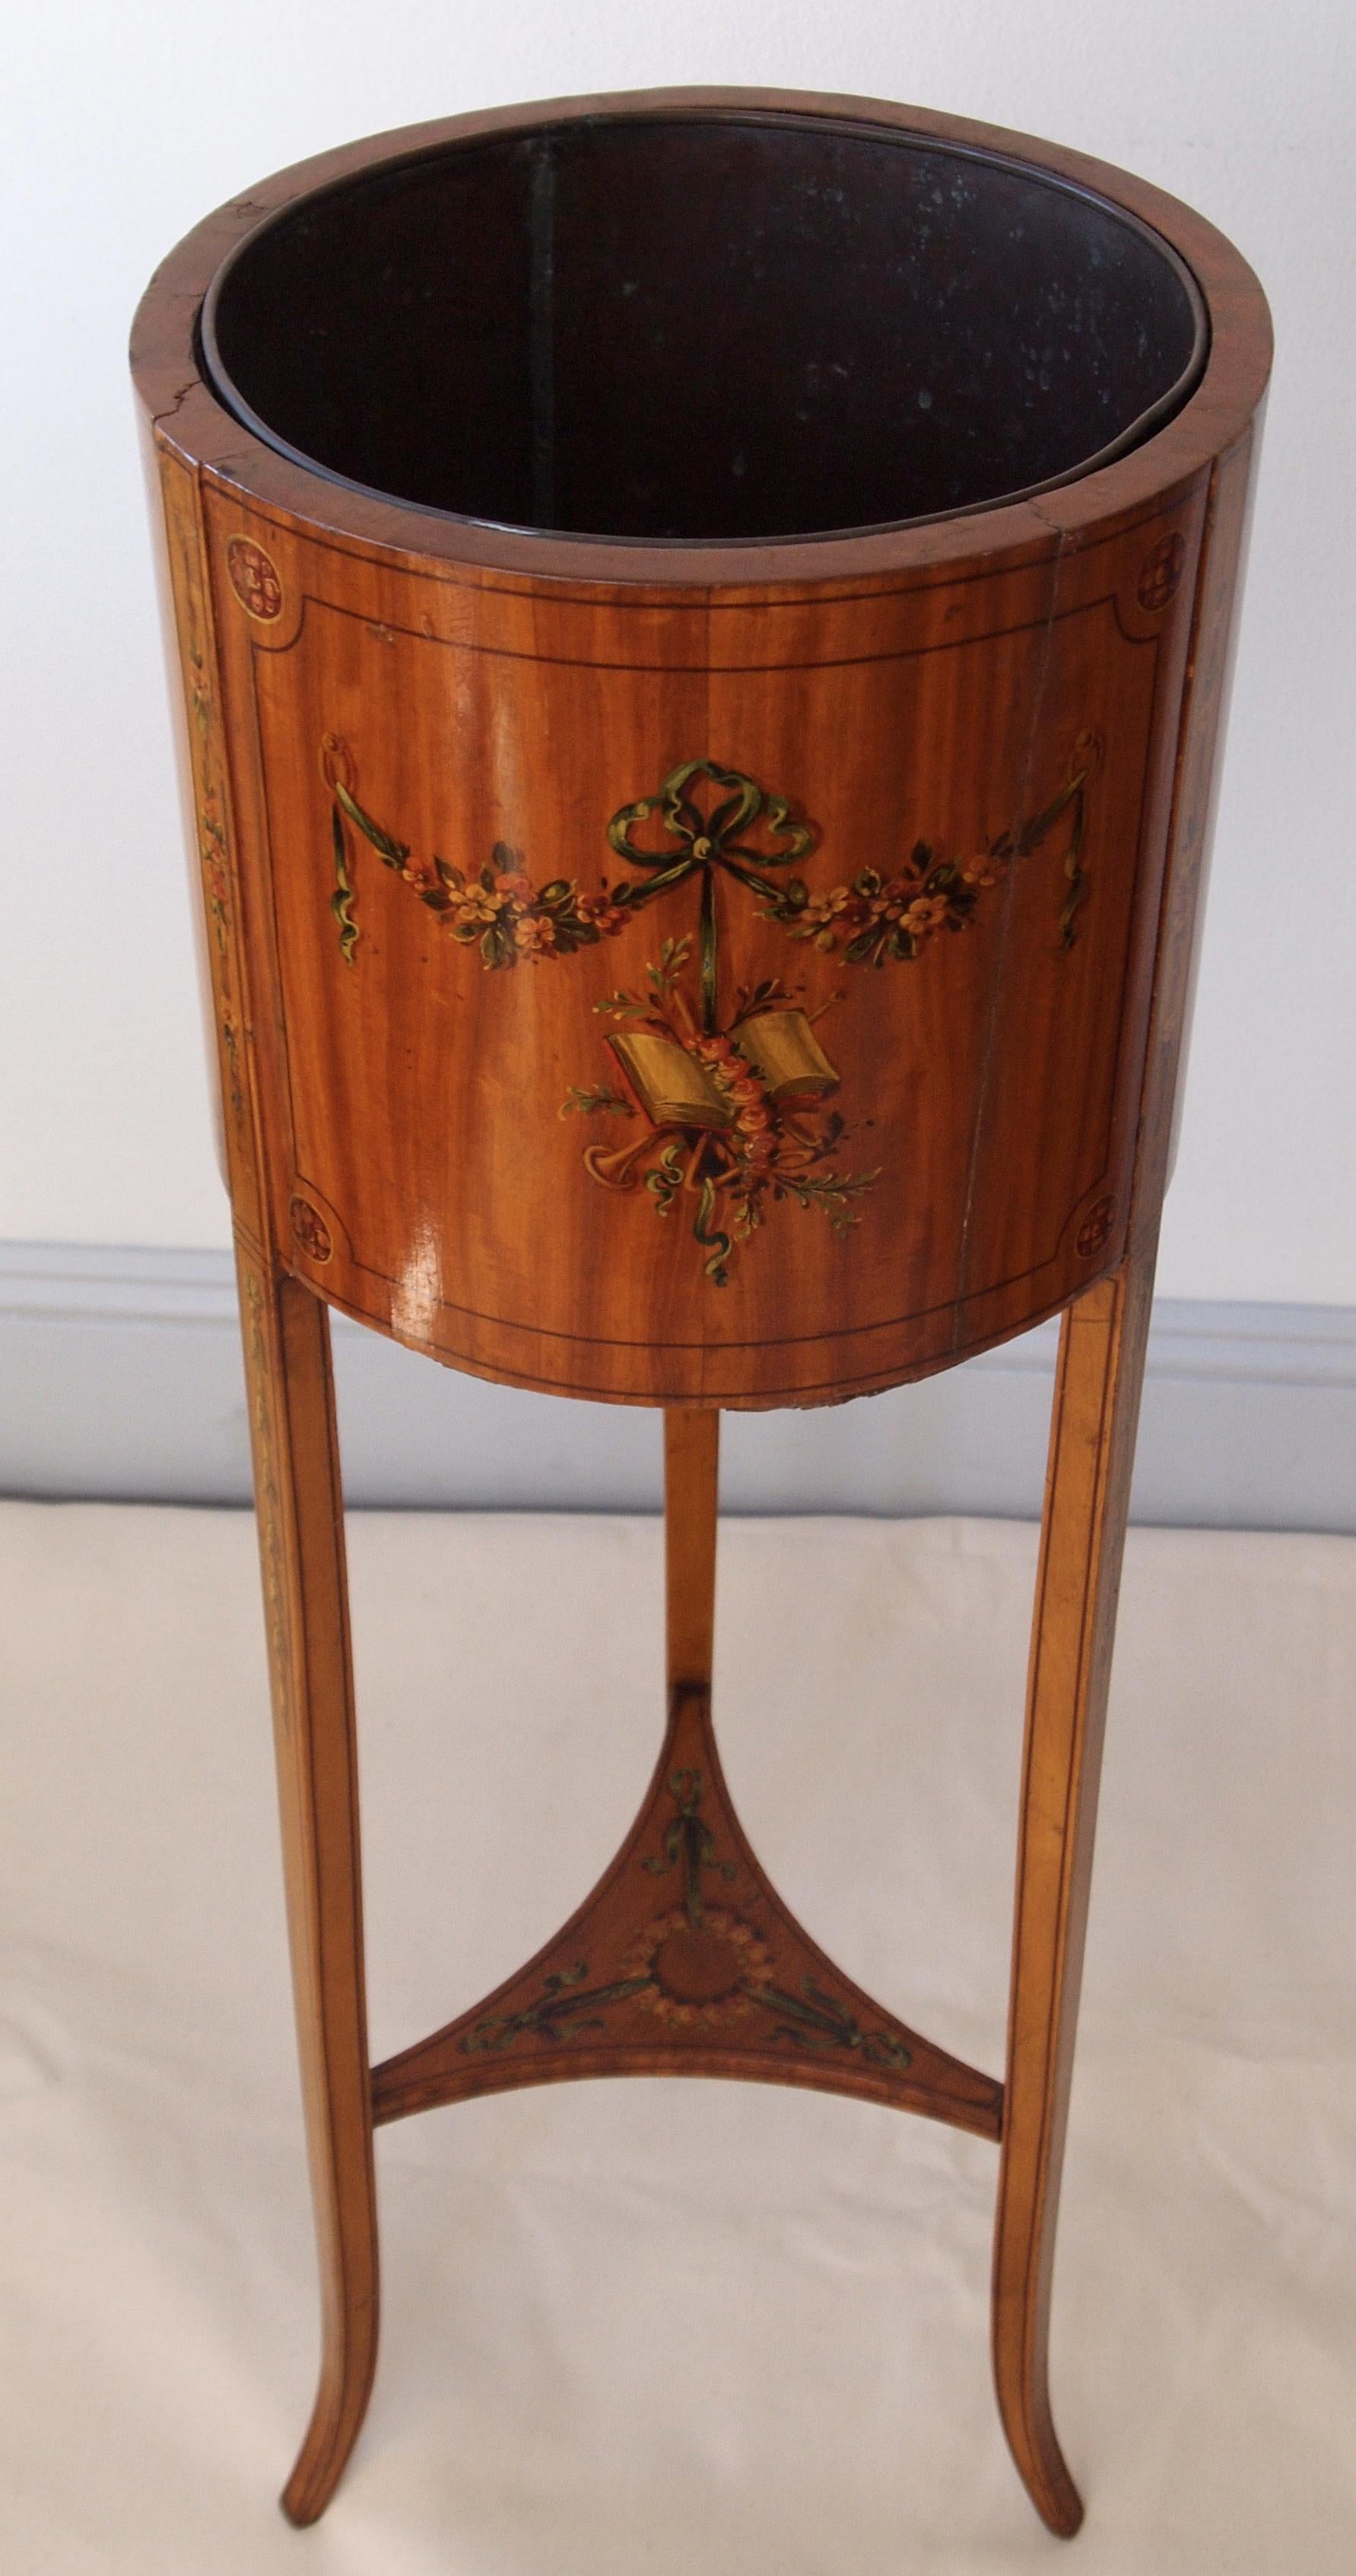 Sheraton Revival Satinwood Round Planter with Painted Decoration 8